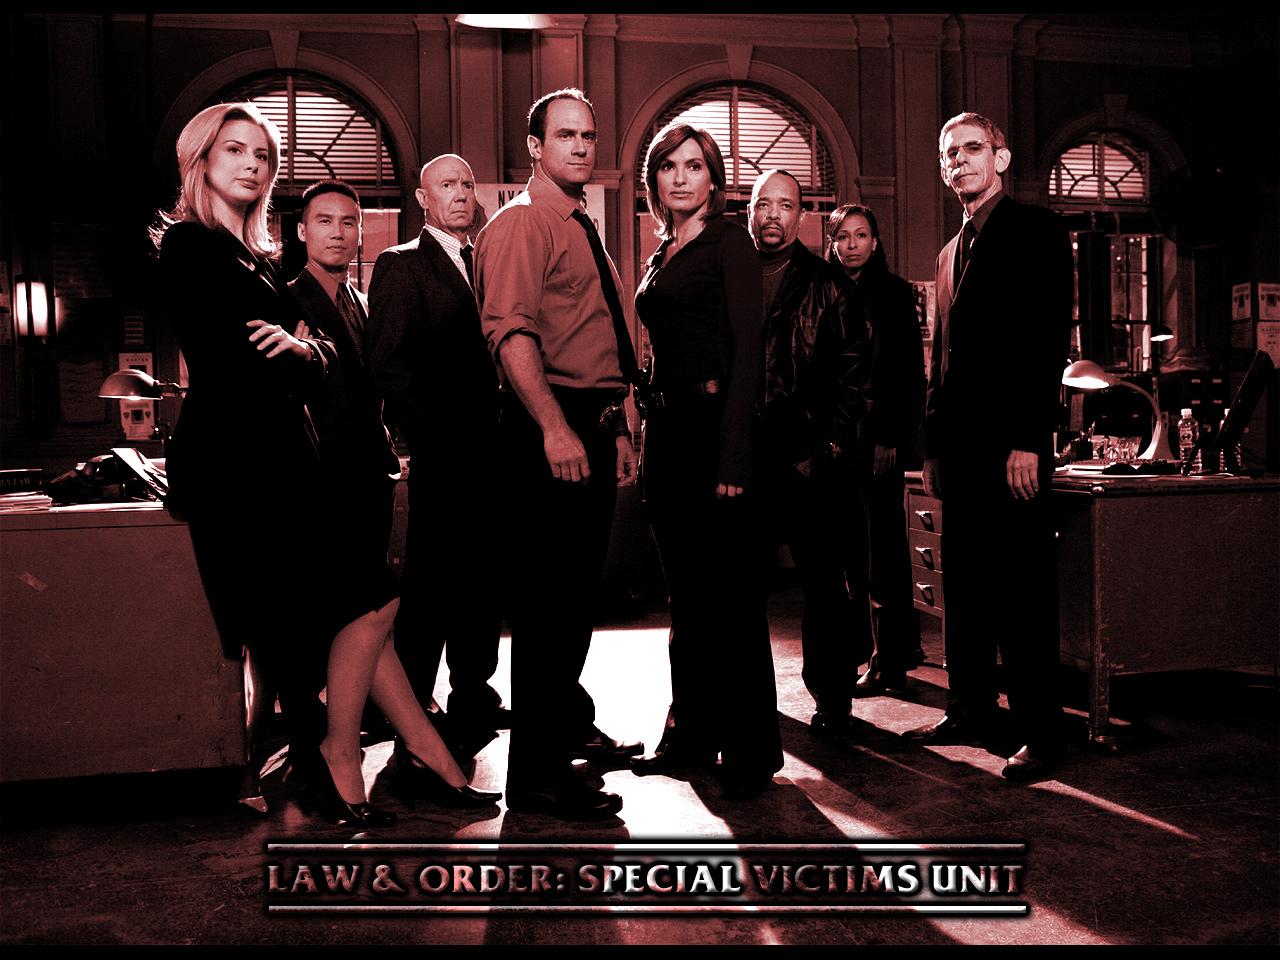 specialvictimsunit.org } Law & Order: Special Victims Unit website